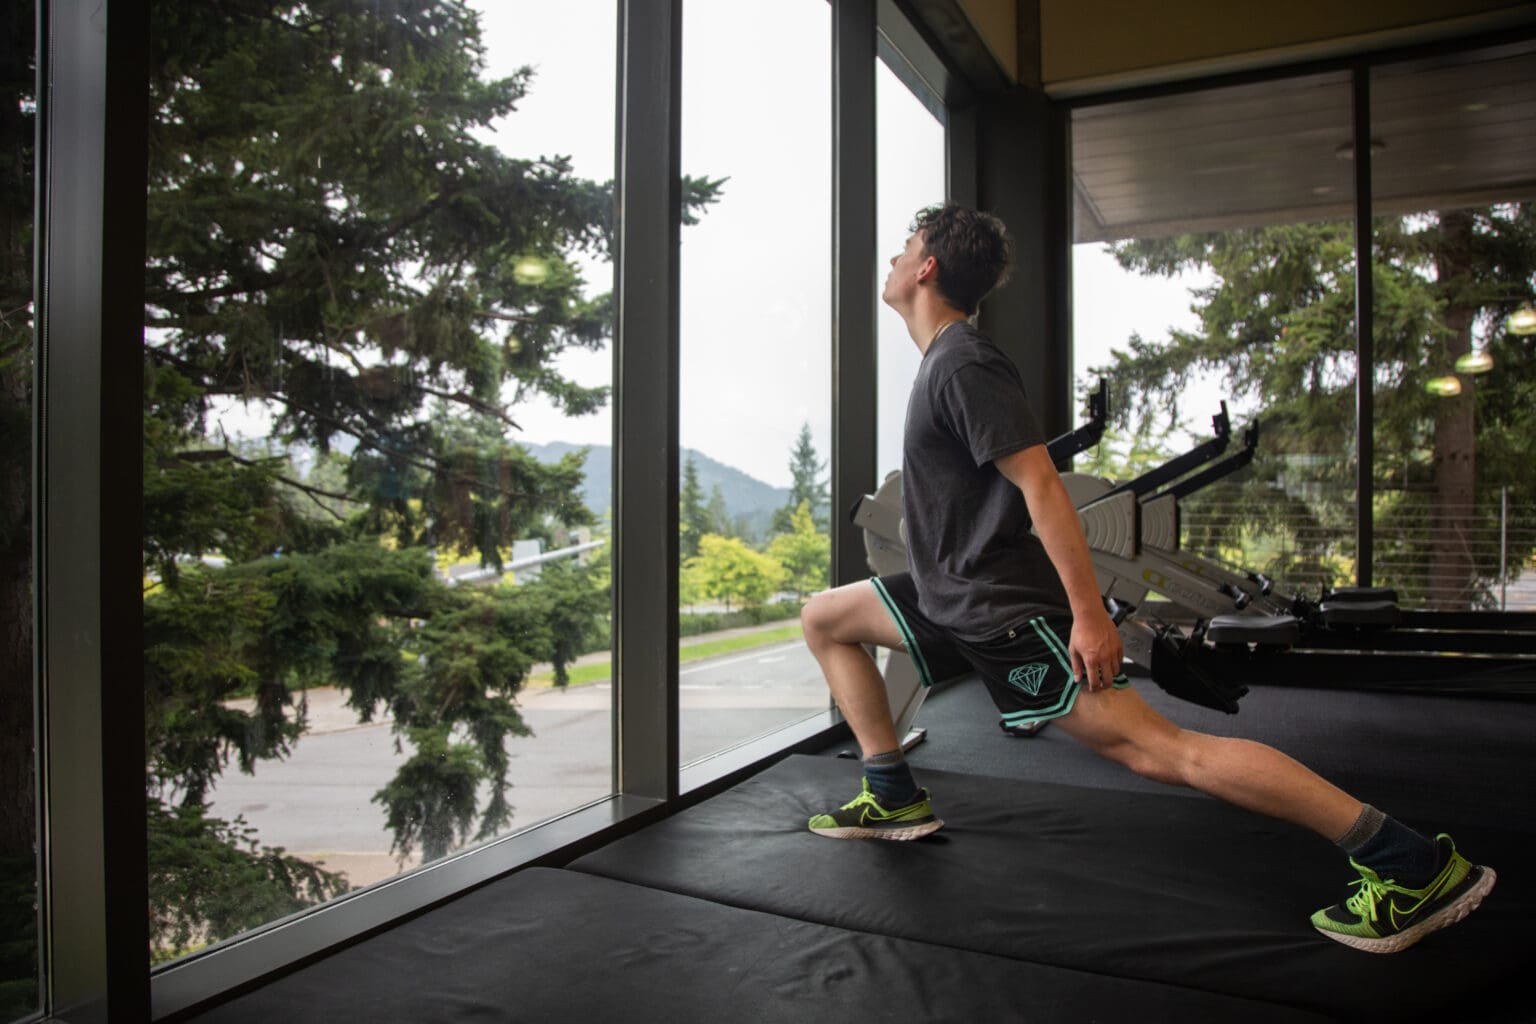 Carson Moss stretches at the Wade King Student Recreation Center at Western Washington University Aug. 9. Bellingham residents should find a way to build a larger-scale recreation center open to the general public